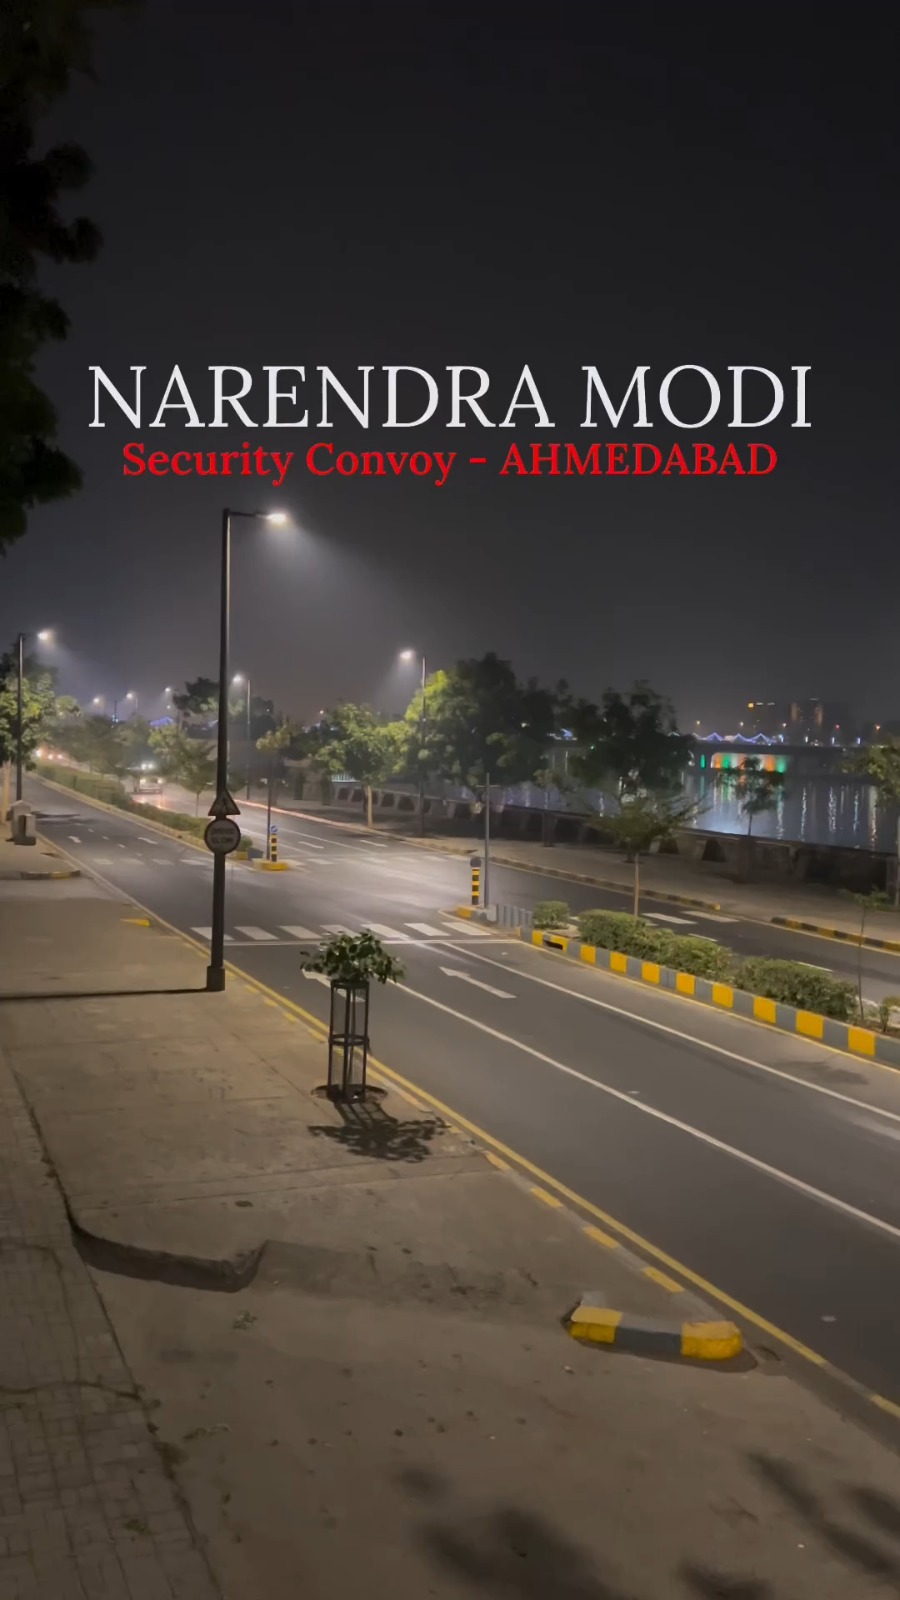 How Many Cars in NARENDRA MODI Convoy…? Security Convoy in Ahmedabad